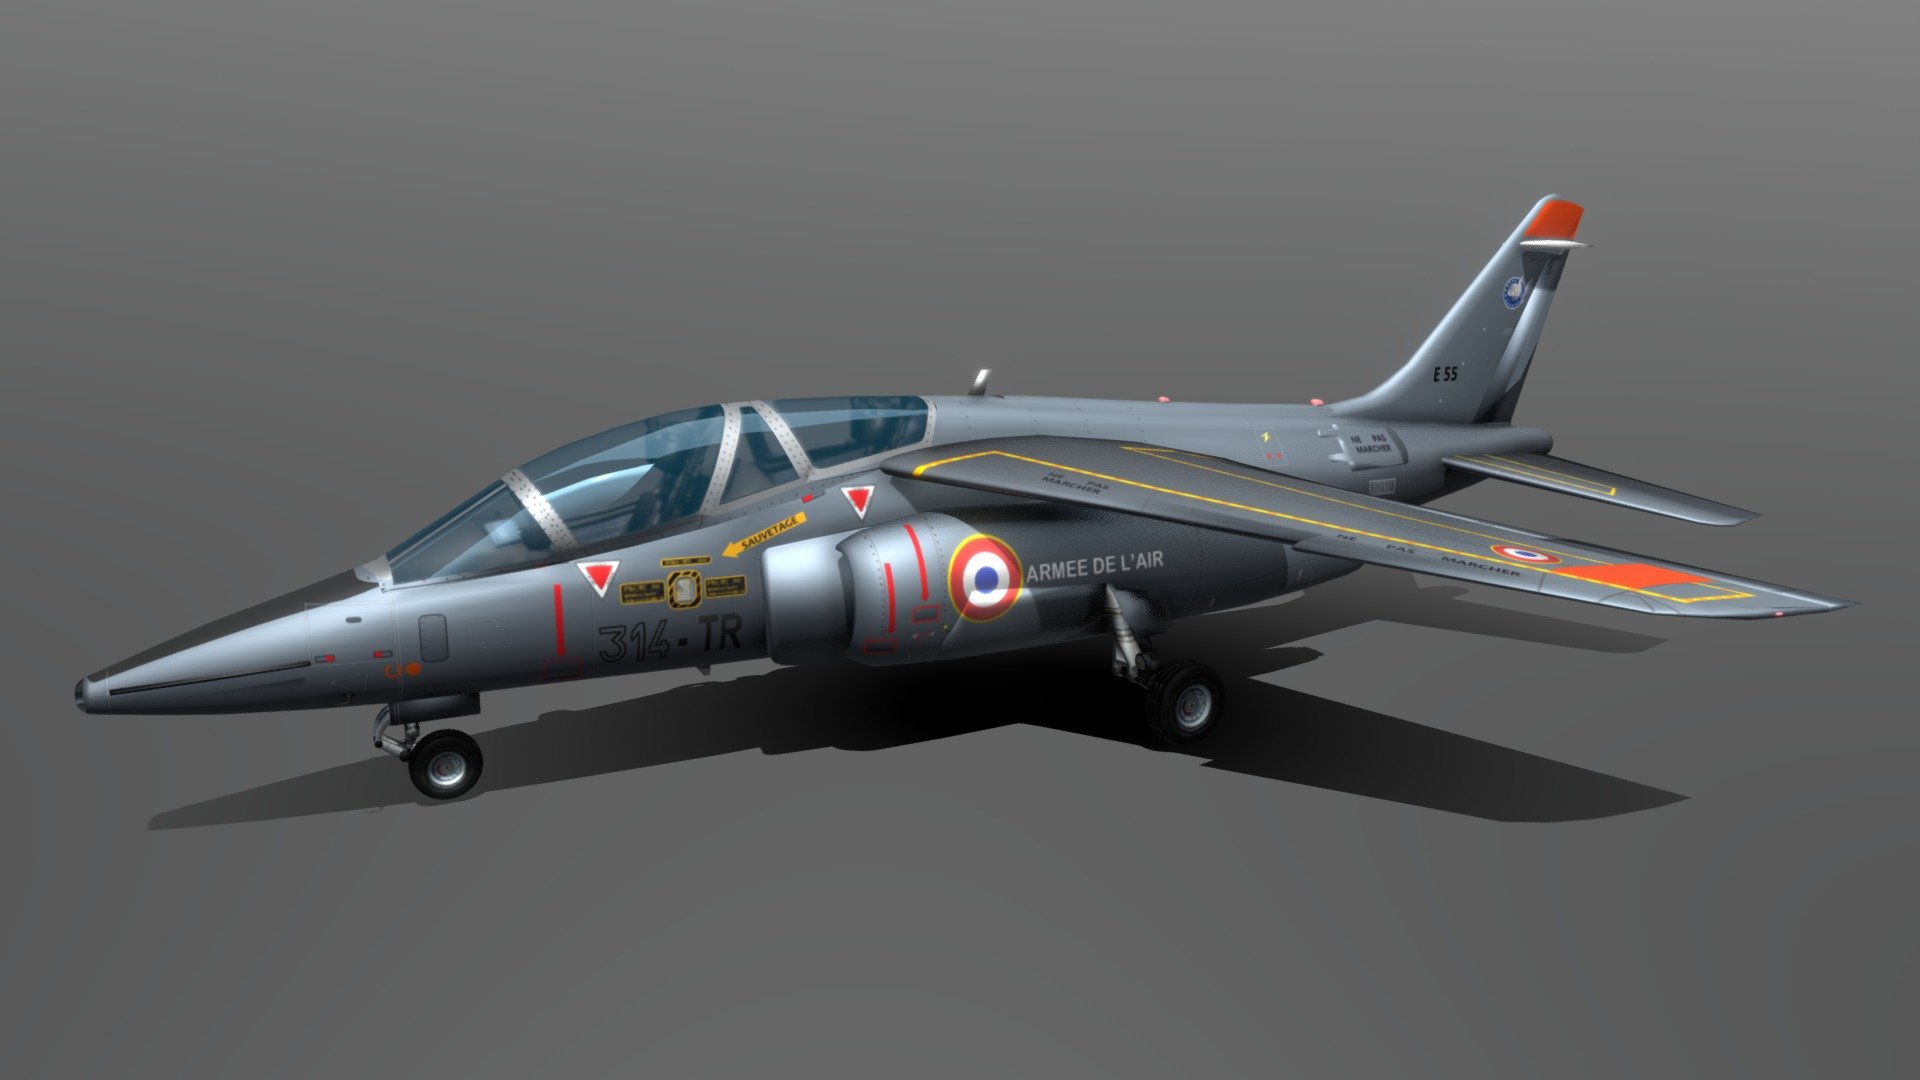 Training plane for the future fighter pilot of the French Air Force. The modeling was done under blender. Texture under illustrator and photoshop 3d model